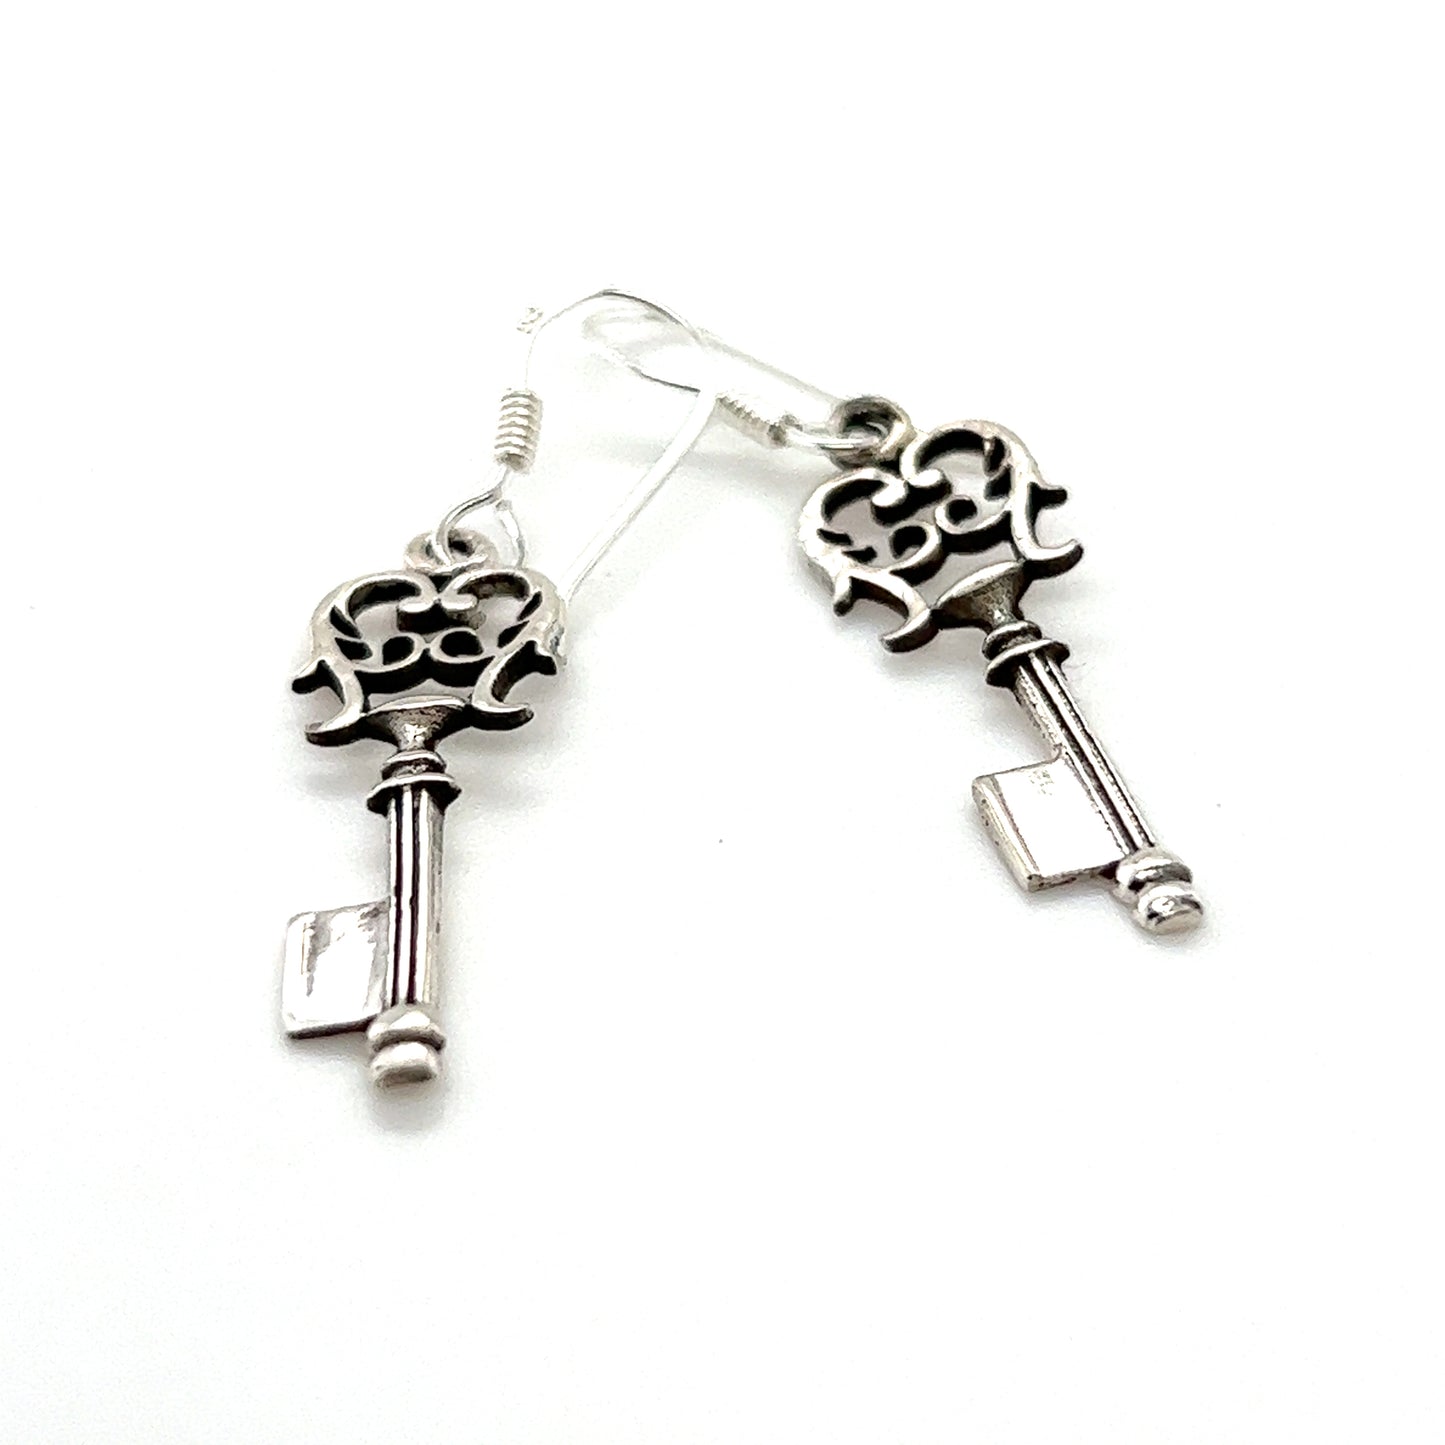 Unique Super Silver Skeleton Key Earrings on a white background.